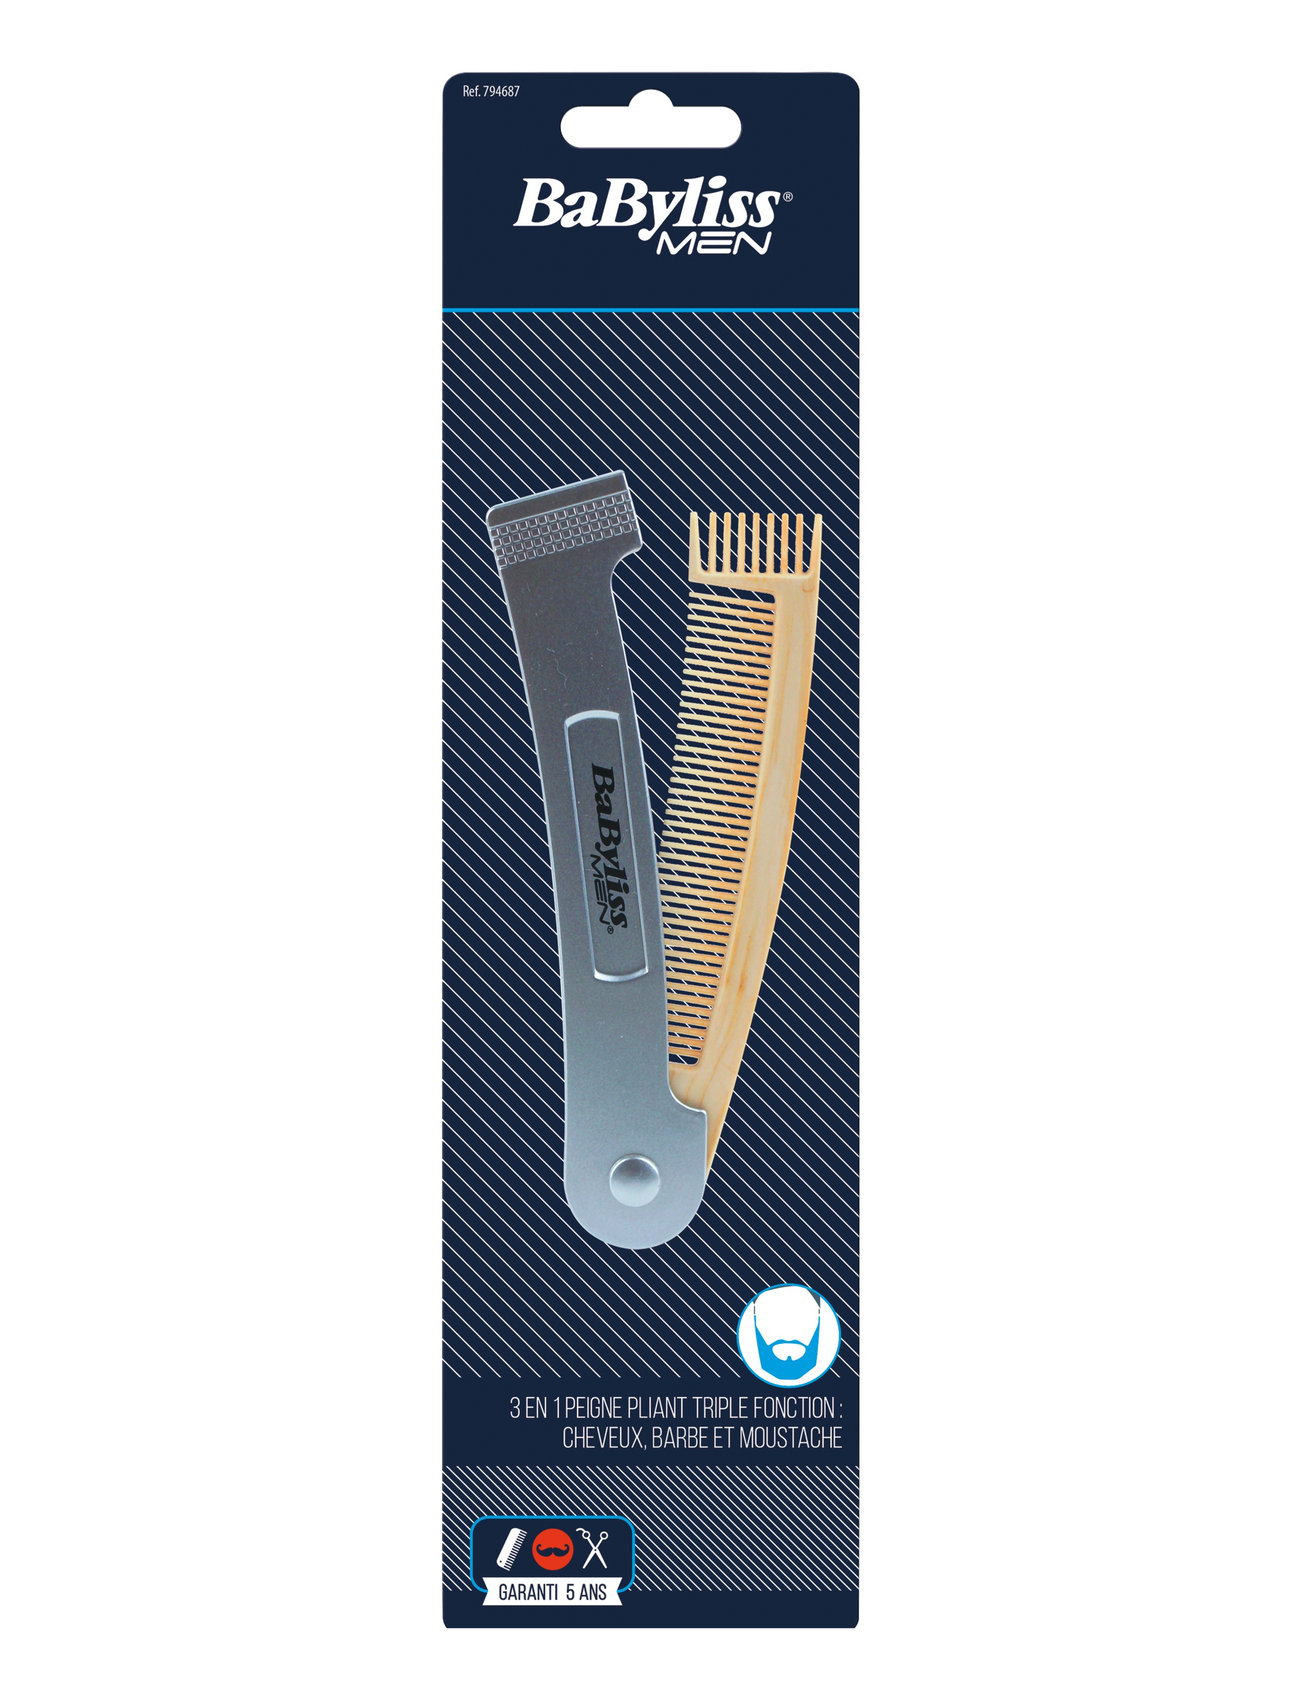 794687 Shavette Comb Beauty Men Hair Styling Combs And Brushes Silver Babyliss Paris